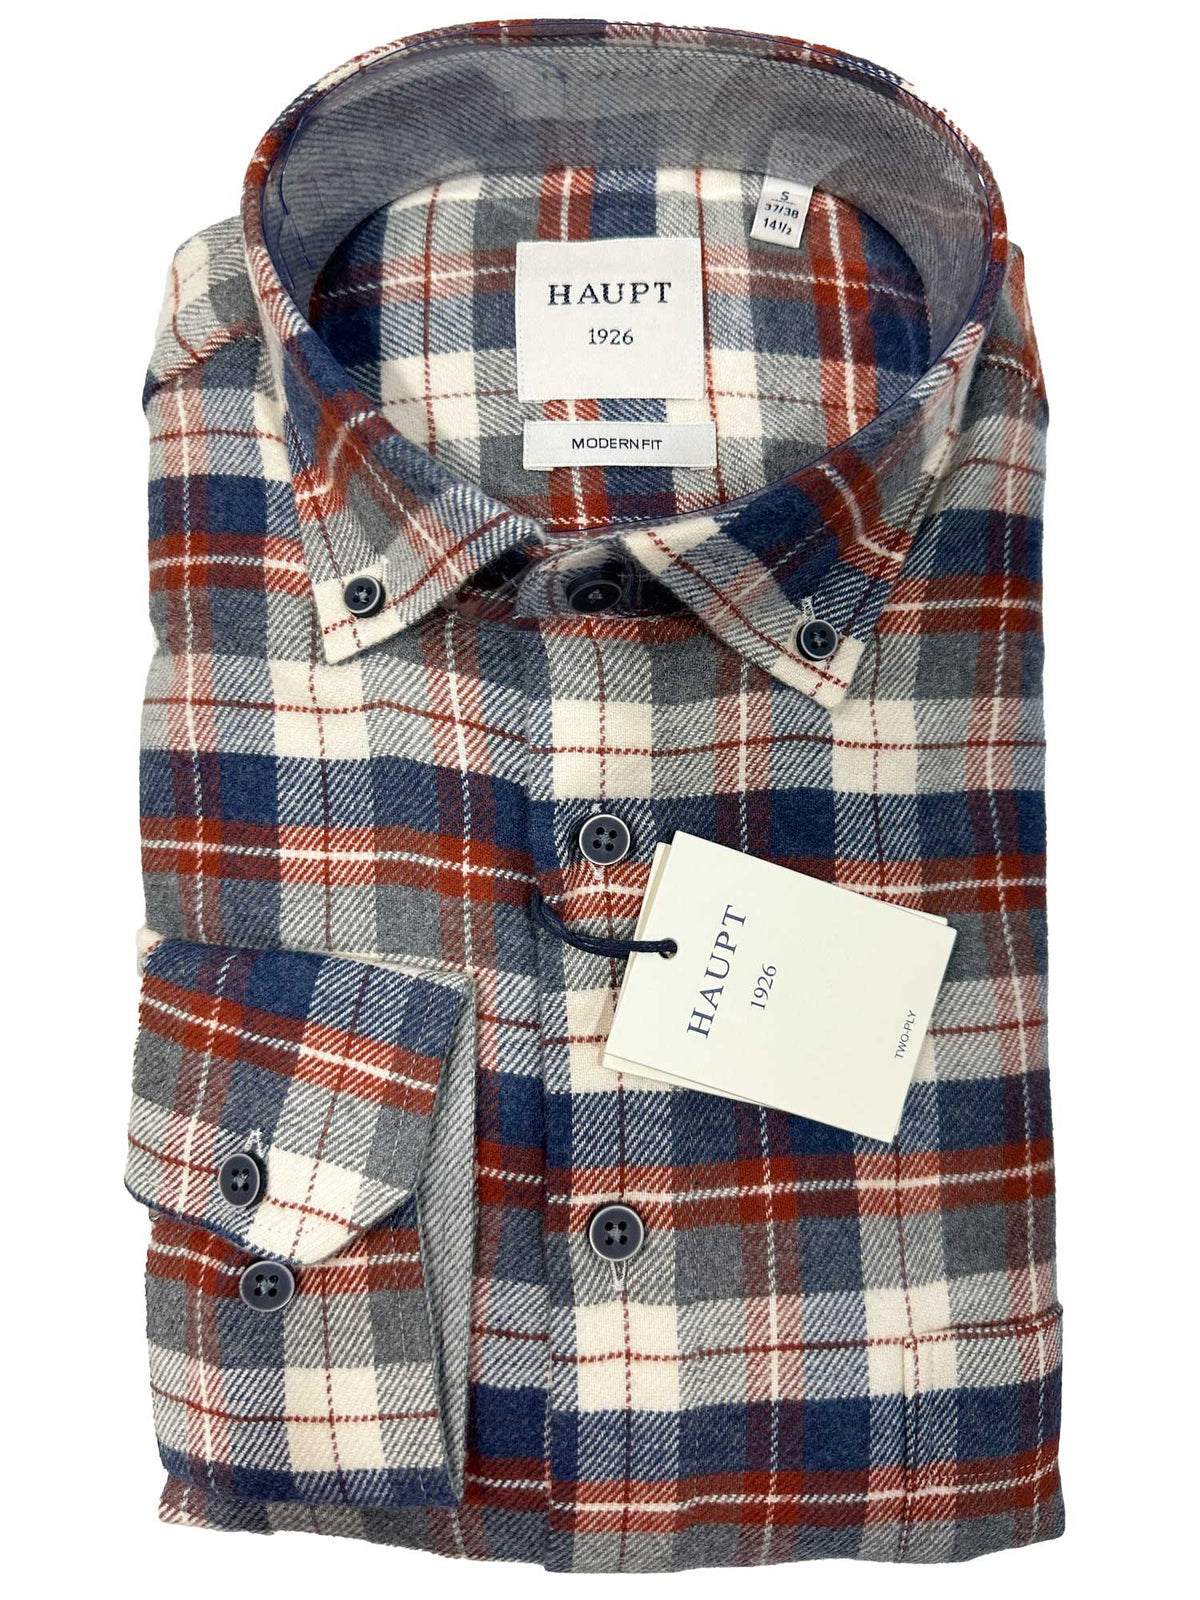 2414-73  https://harrysformenswear.com.au/products/2414-73  For almost a century, Haupt Fashion Group has been producing quality and creative textiles. Our collections are designed for quality and comfort, resulting in unique details. Well-known worldwide, we now deliver to Harrys. All Cotton Flanell Check Designed in Europe Modern Fit Chest Pocket